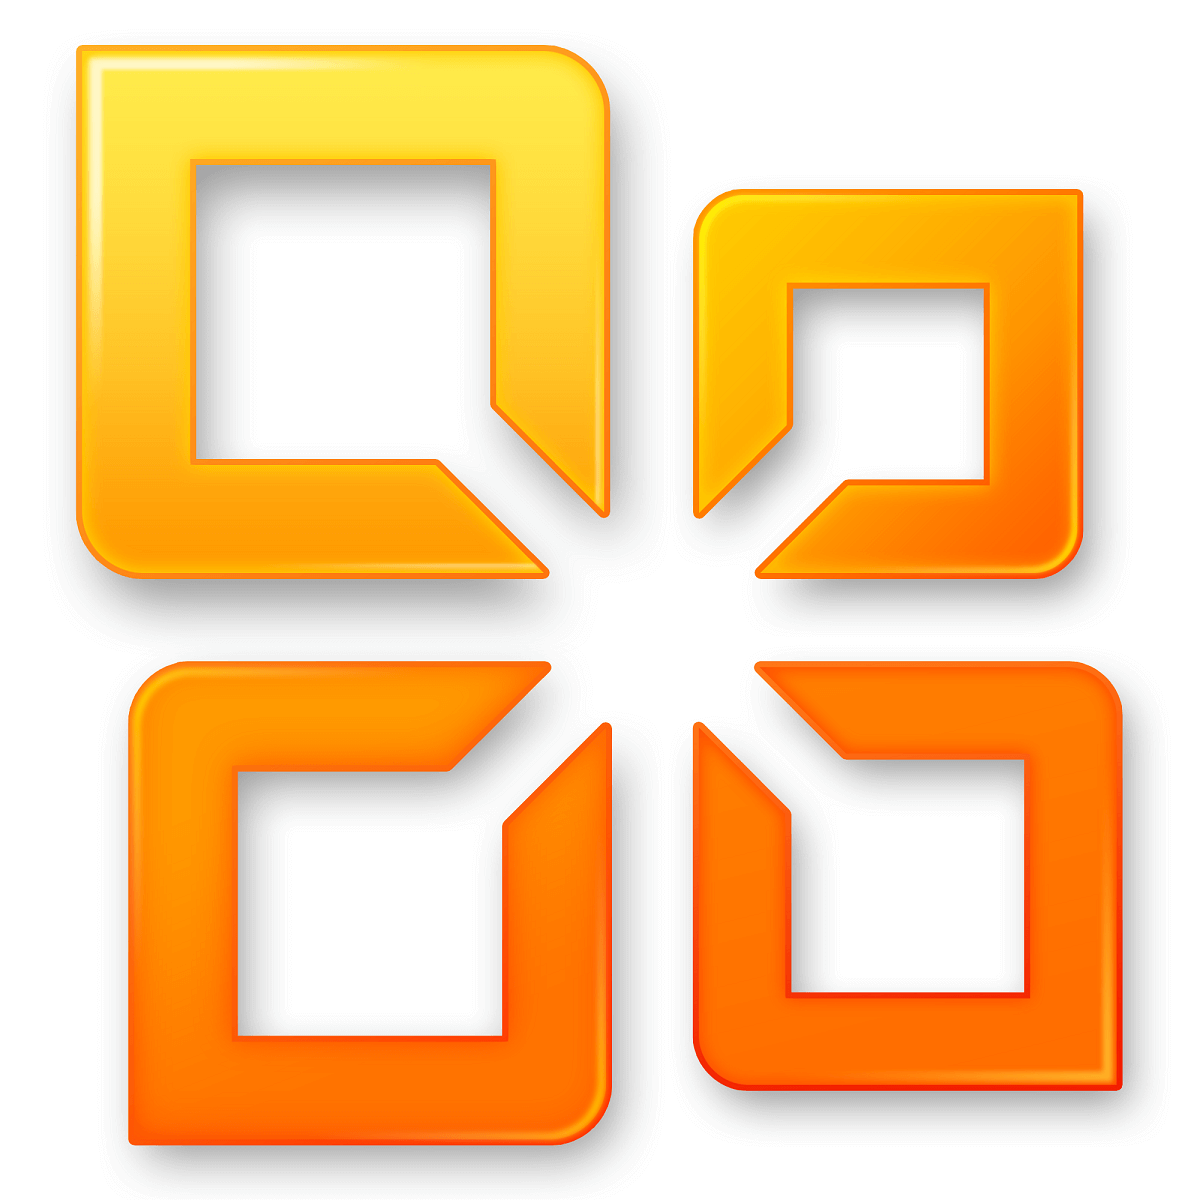 microsoft office picture manager download windows 8.1